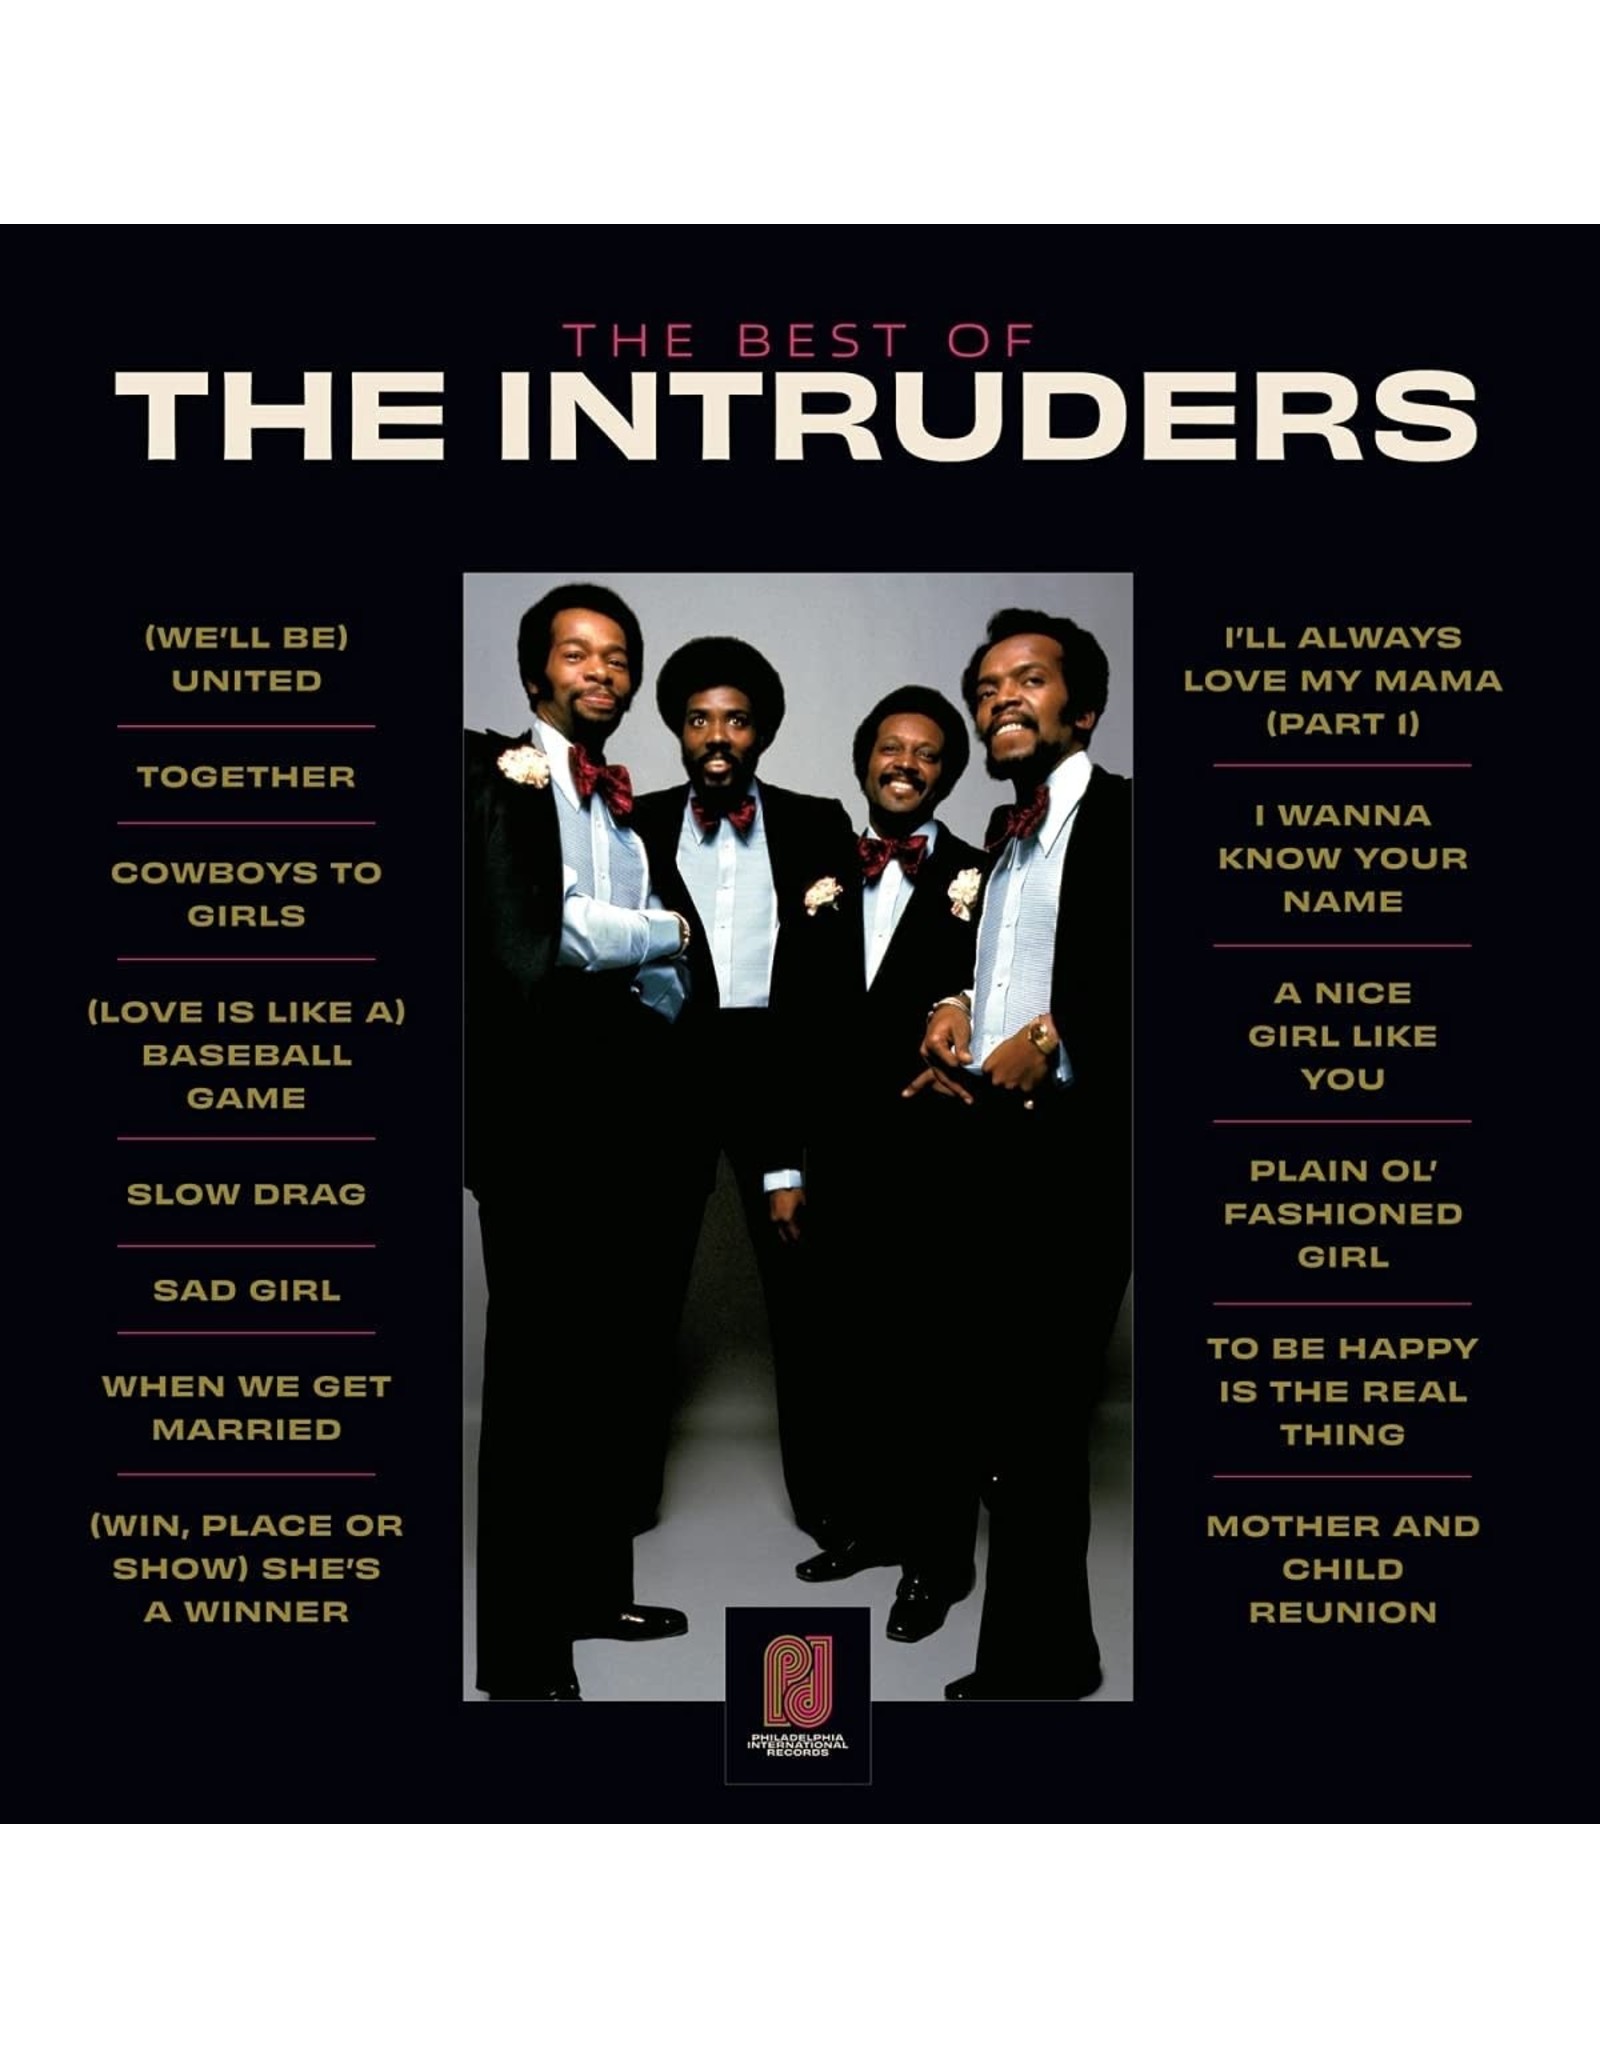 Intruders - The Best of The Intruders